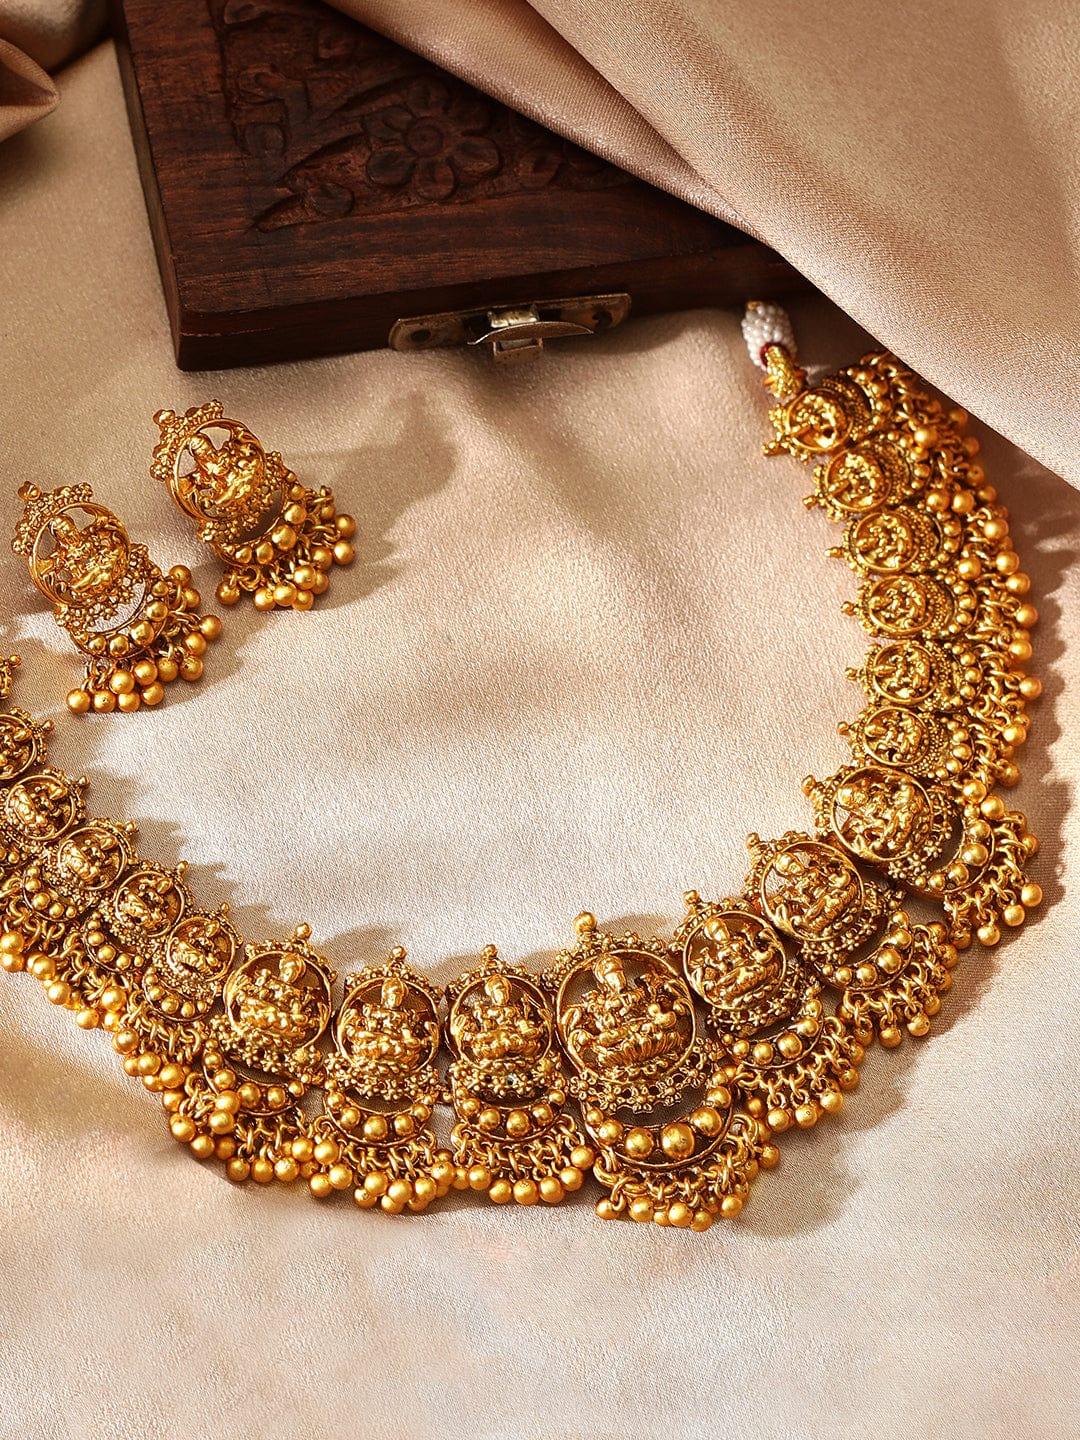 Rubans 24K Gold Plated Filigree Handcrafted Temple Necklace Set - Indiakreations